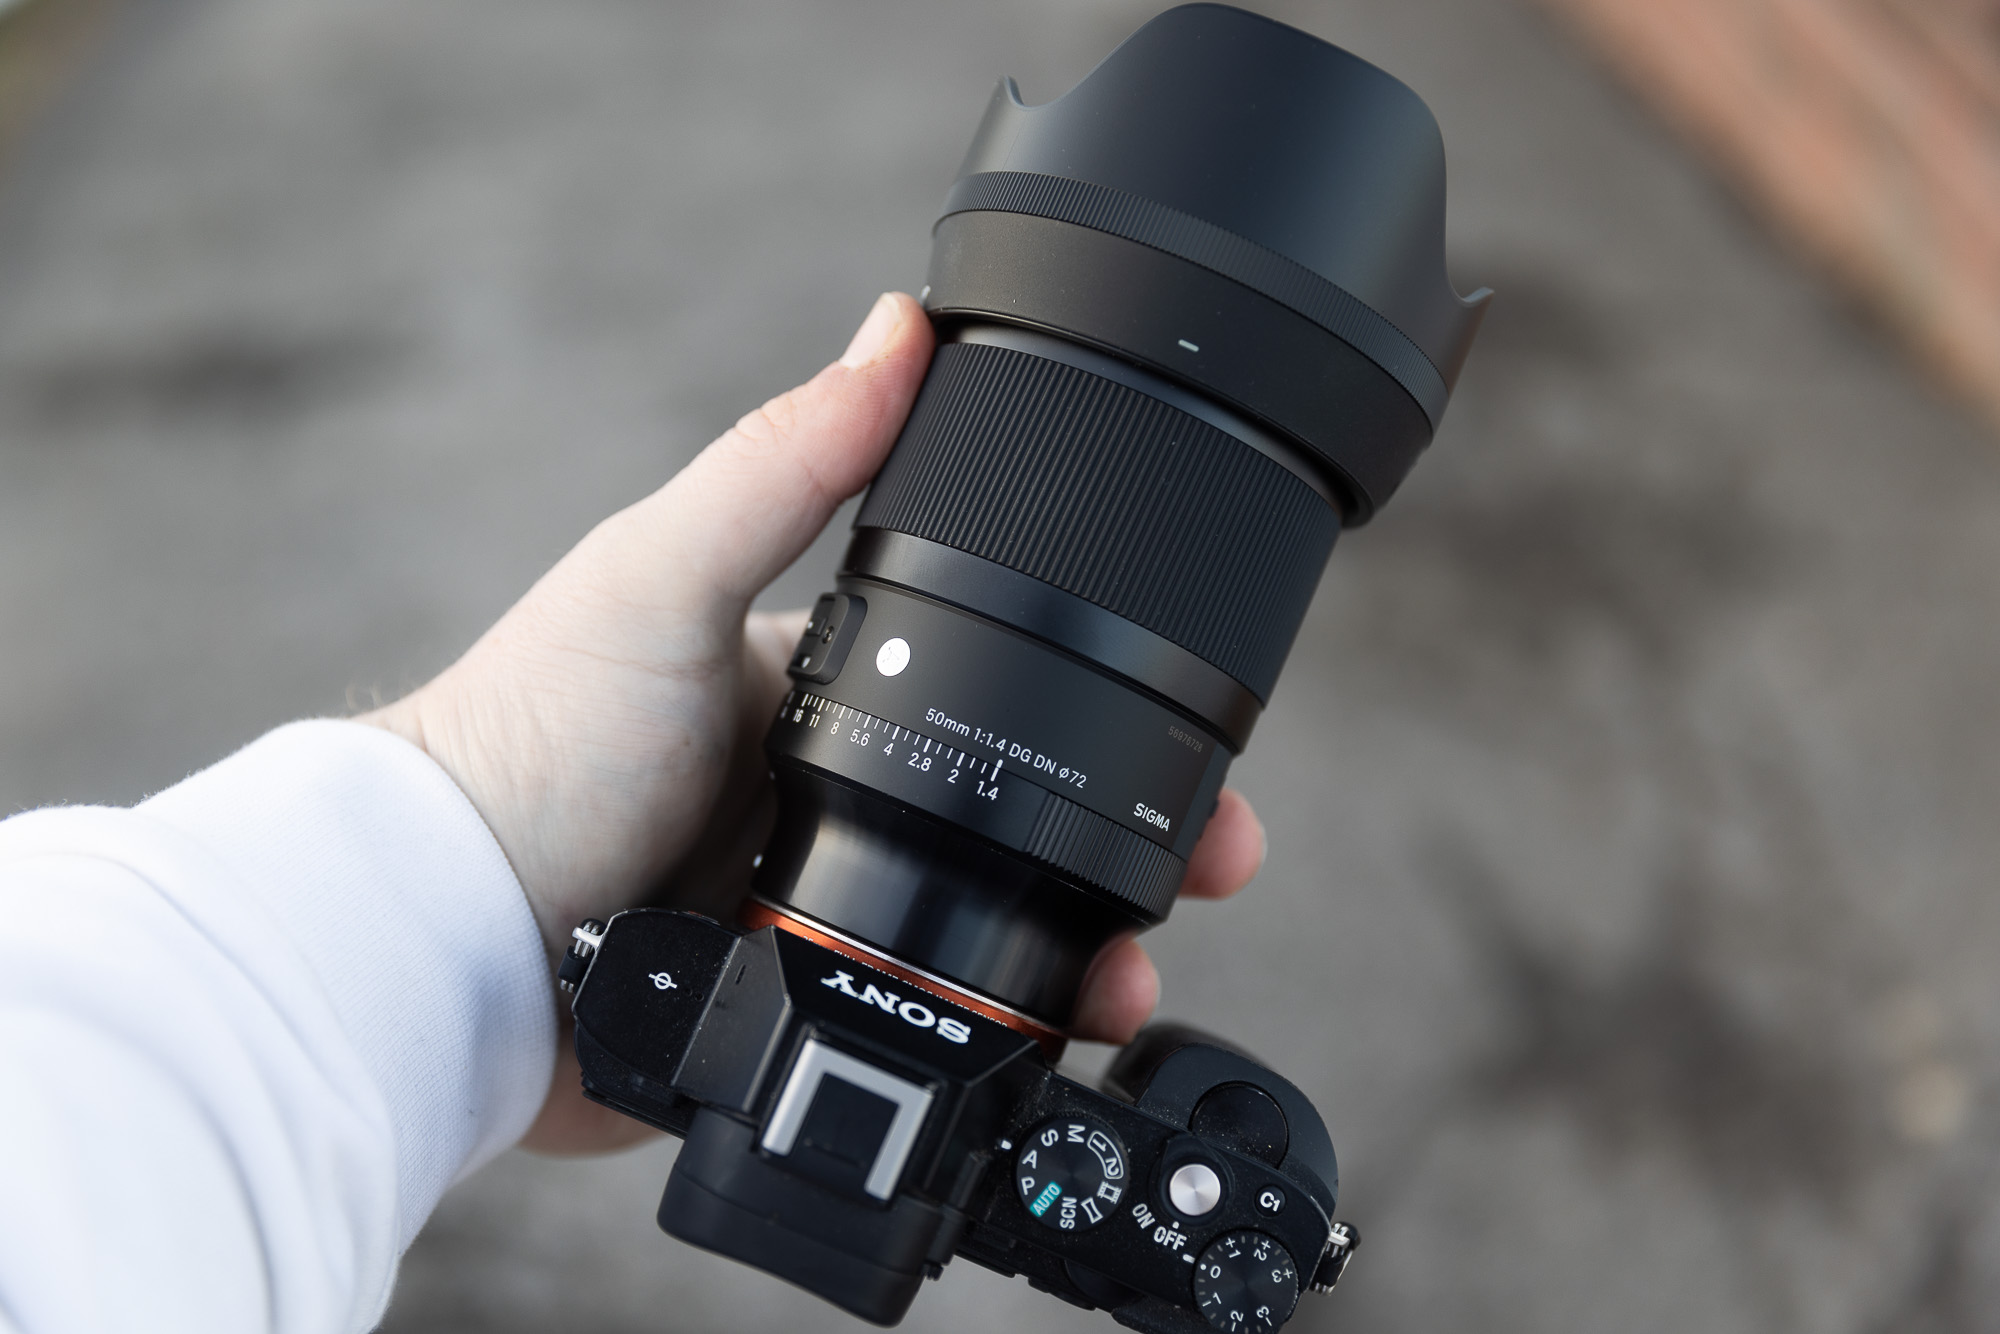 Hands-on with the new Sigma 50mm f/1.4 DG DN Art lens | Popular